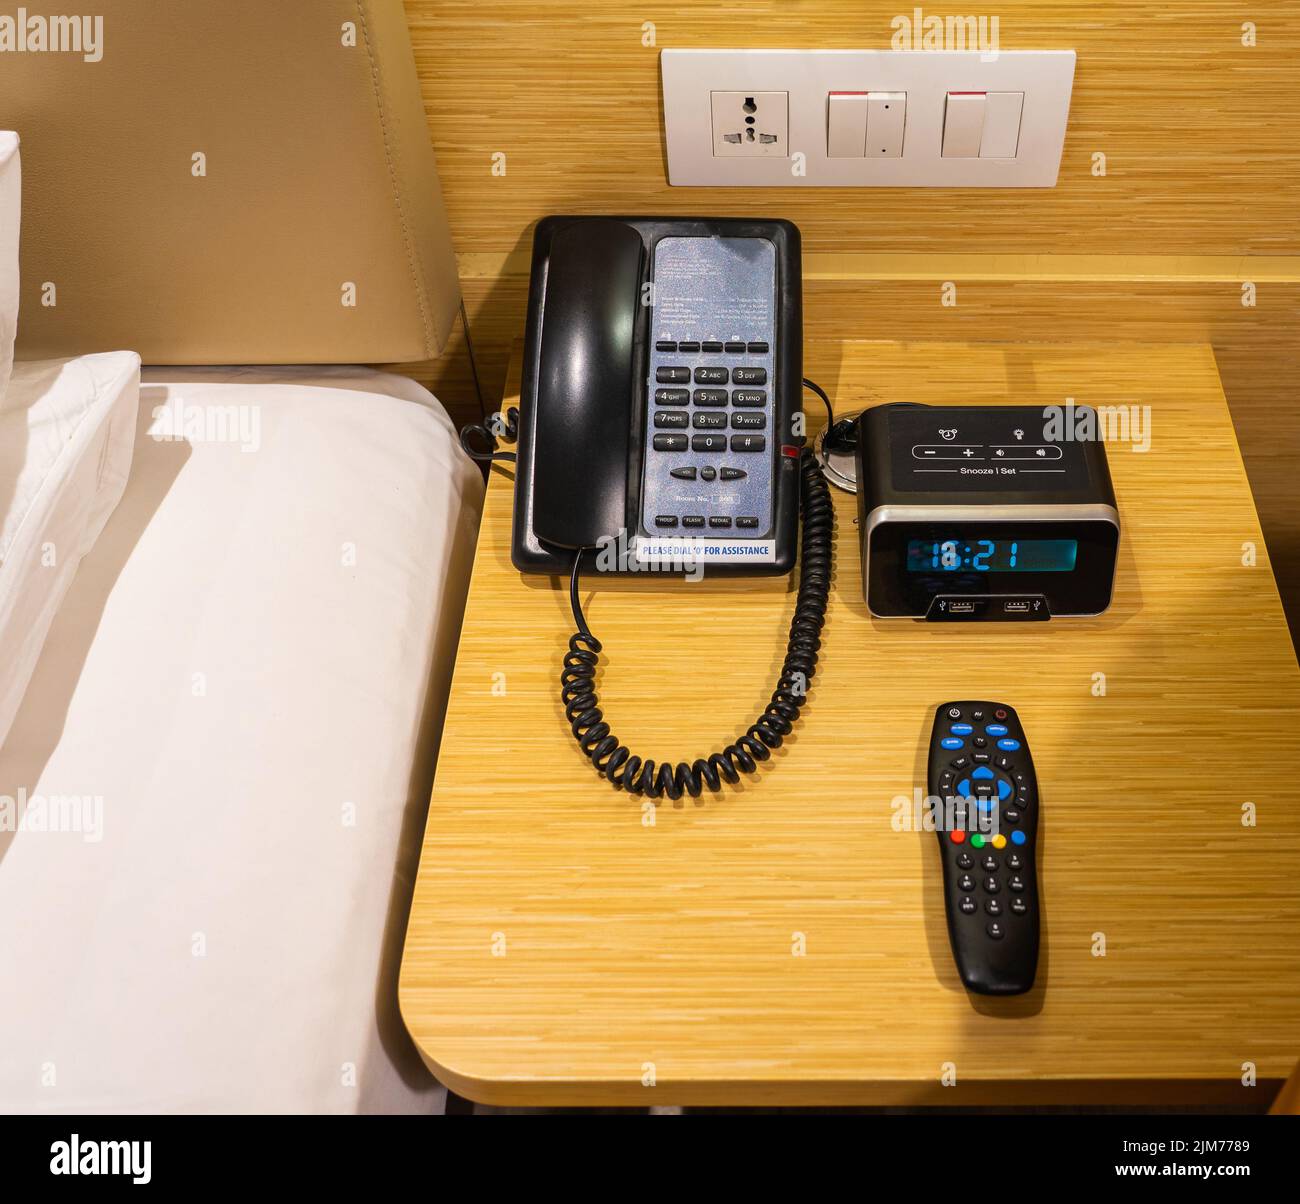 A telephone, digital clock, and a television remote control by the bedside Stock Photo